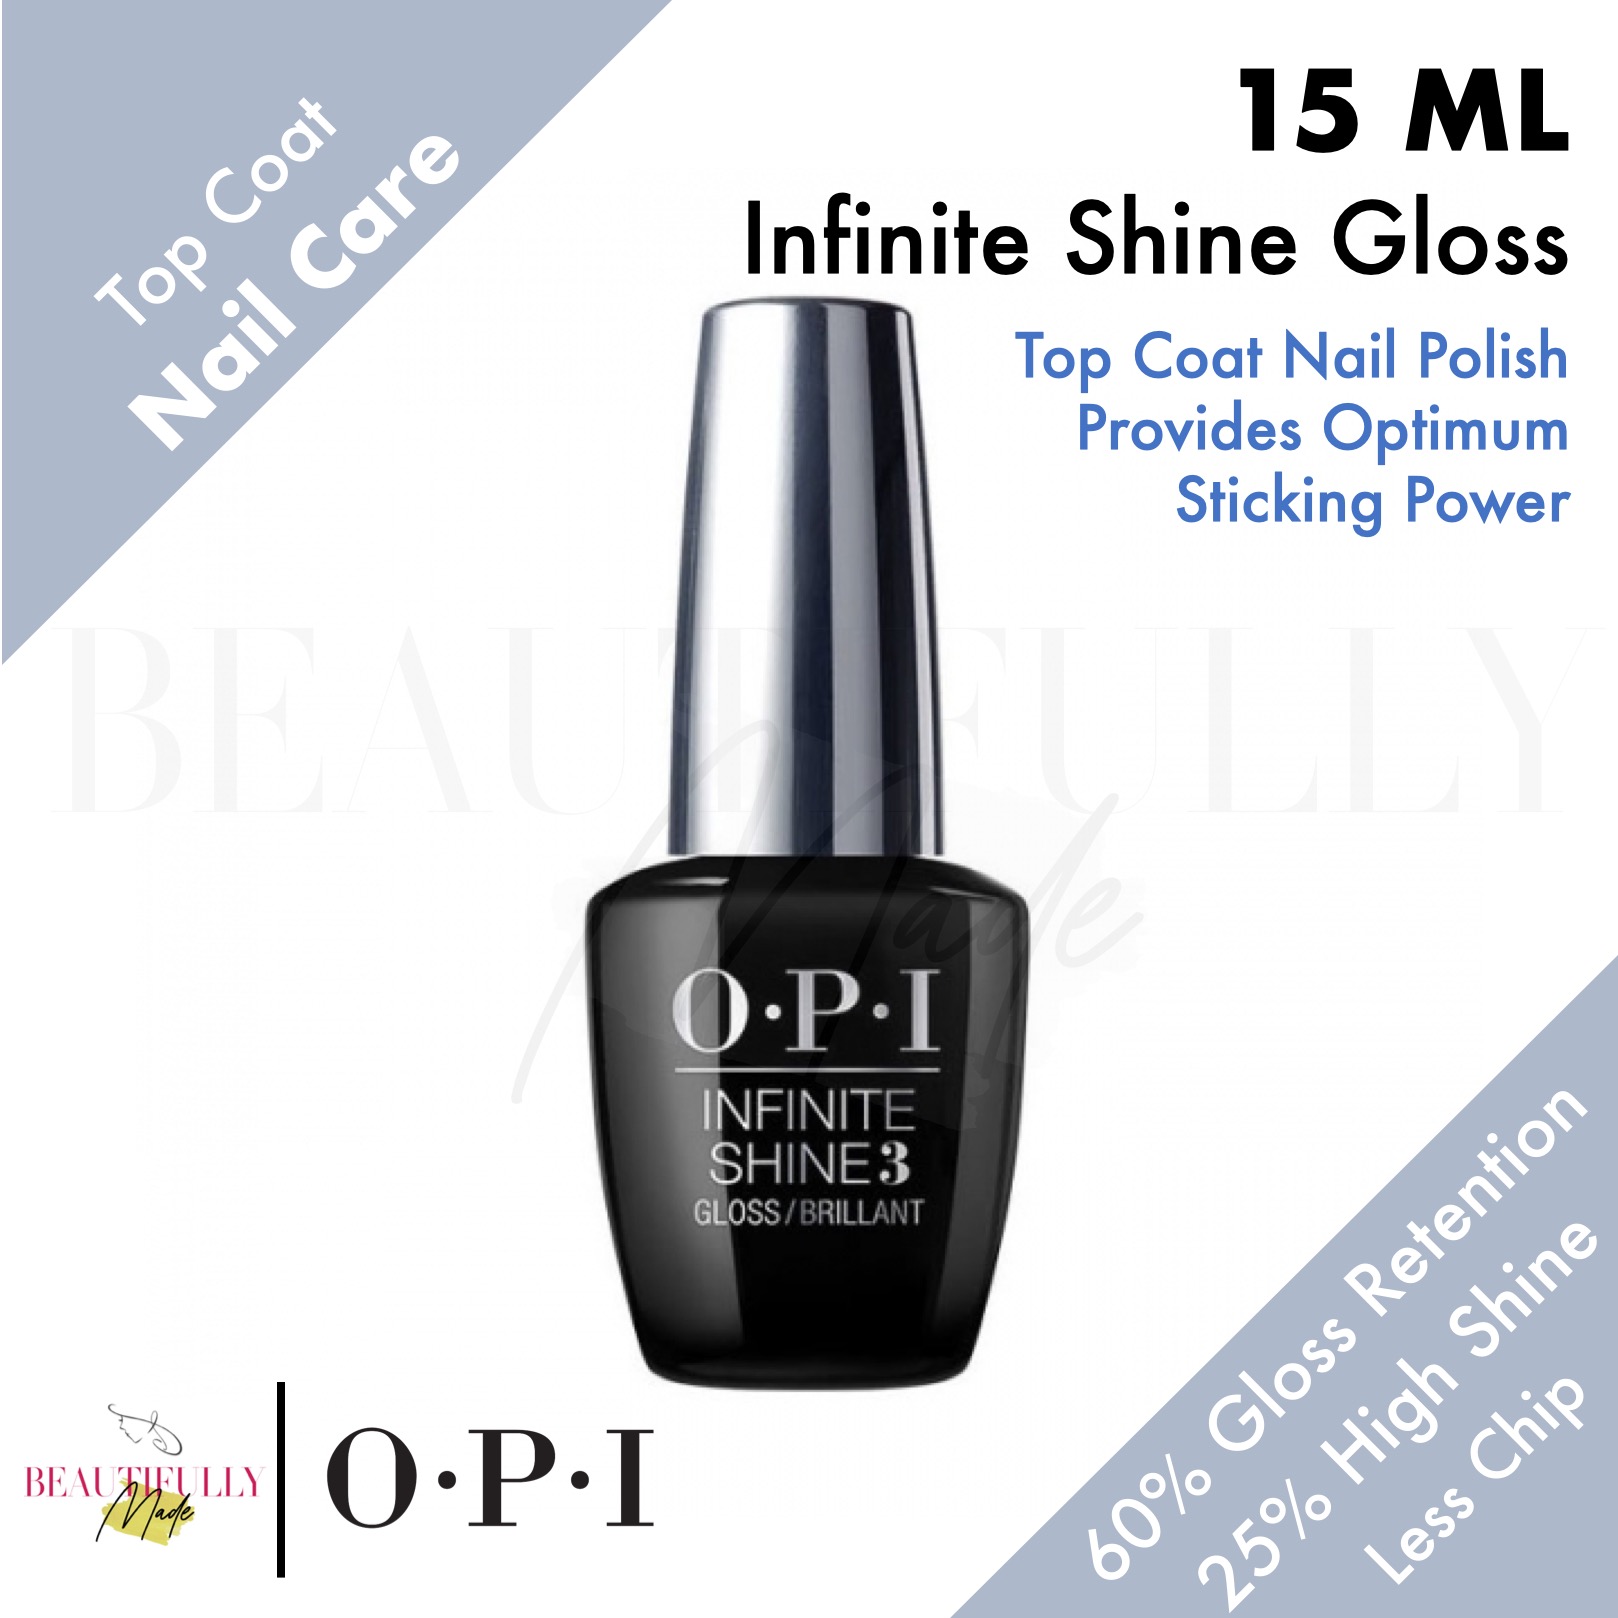 OPI Infinite Shine ProStay Gloss Top Coat 15ml - Less Chipping To Achieving  Long-Lasting Nails 60% Higher Gloss Retention and 25% Higher Shine | Lazada  Singapore